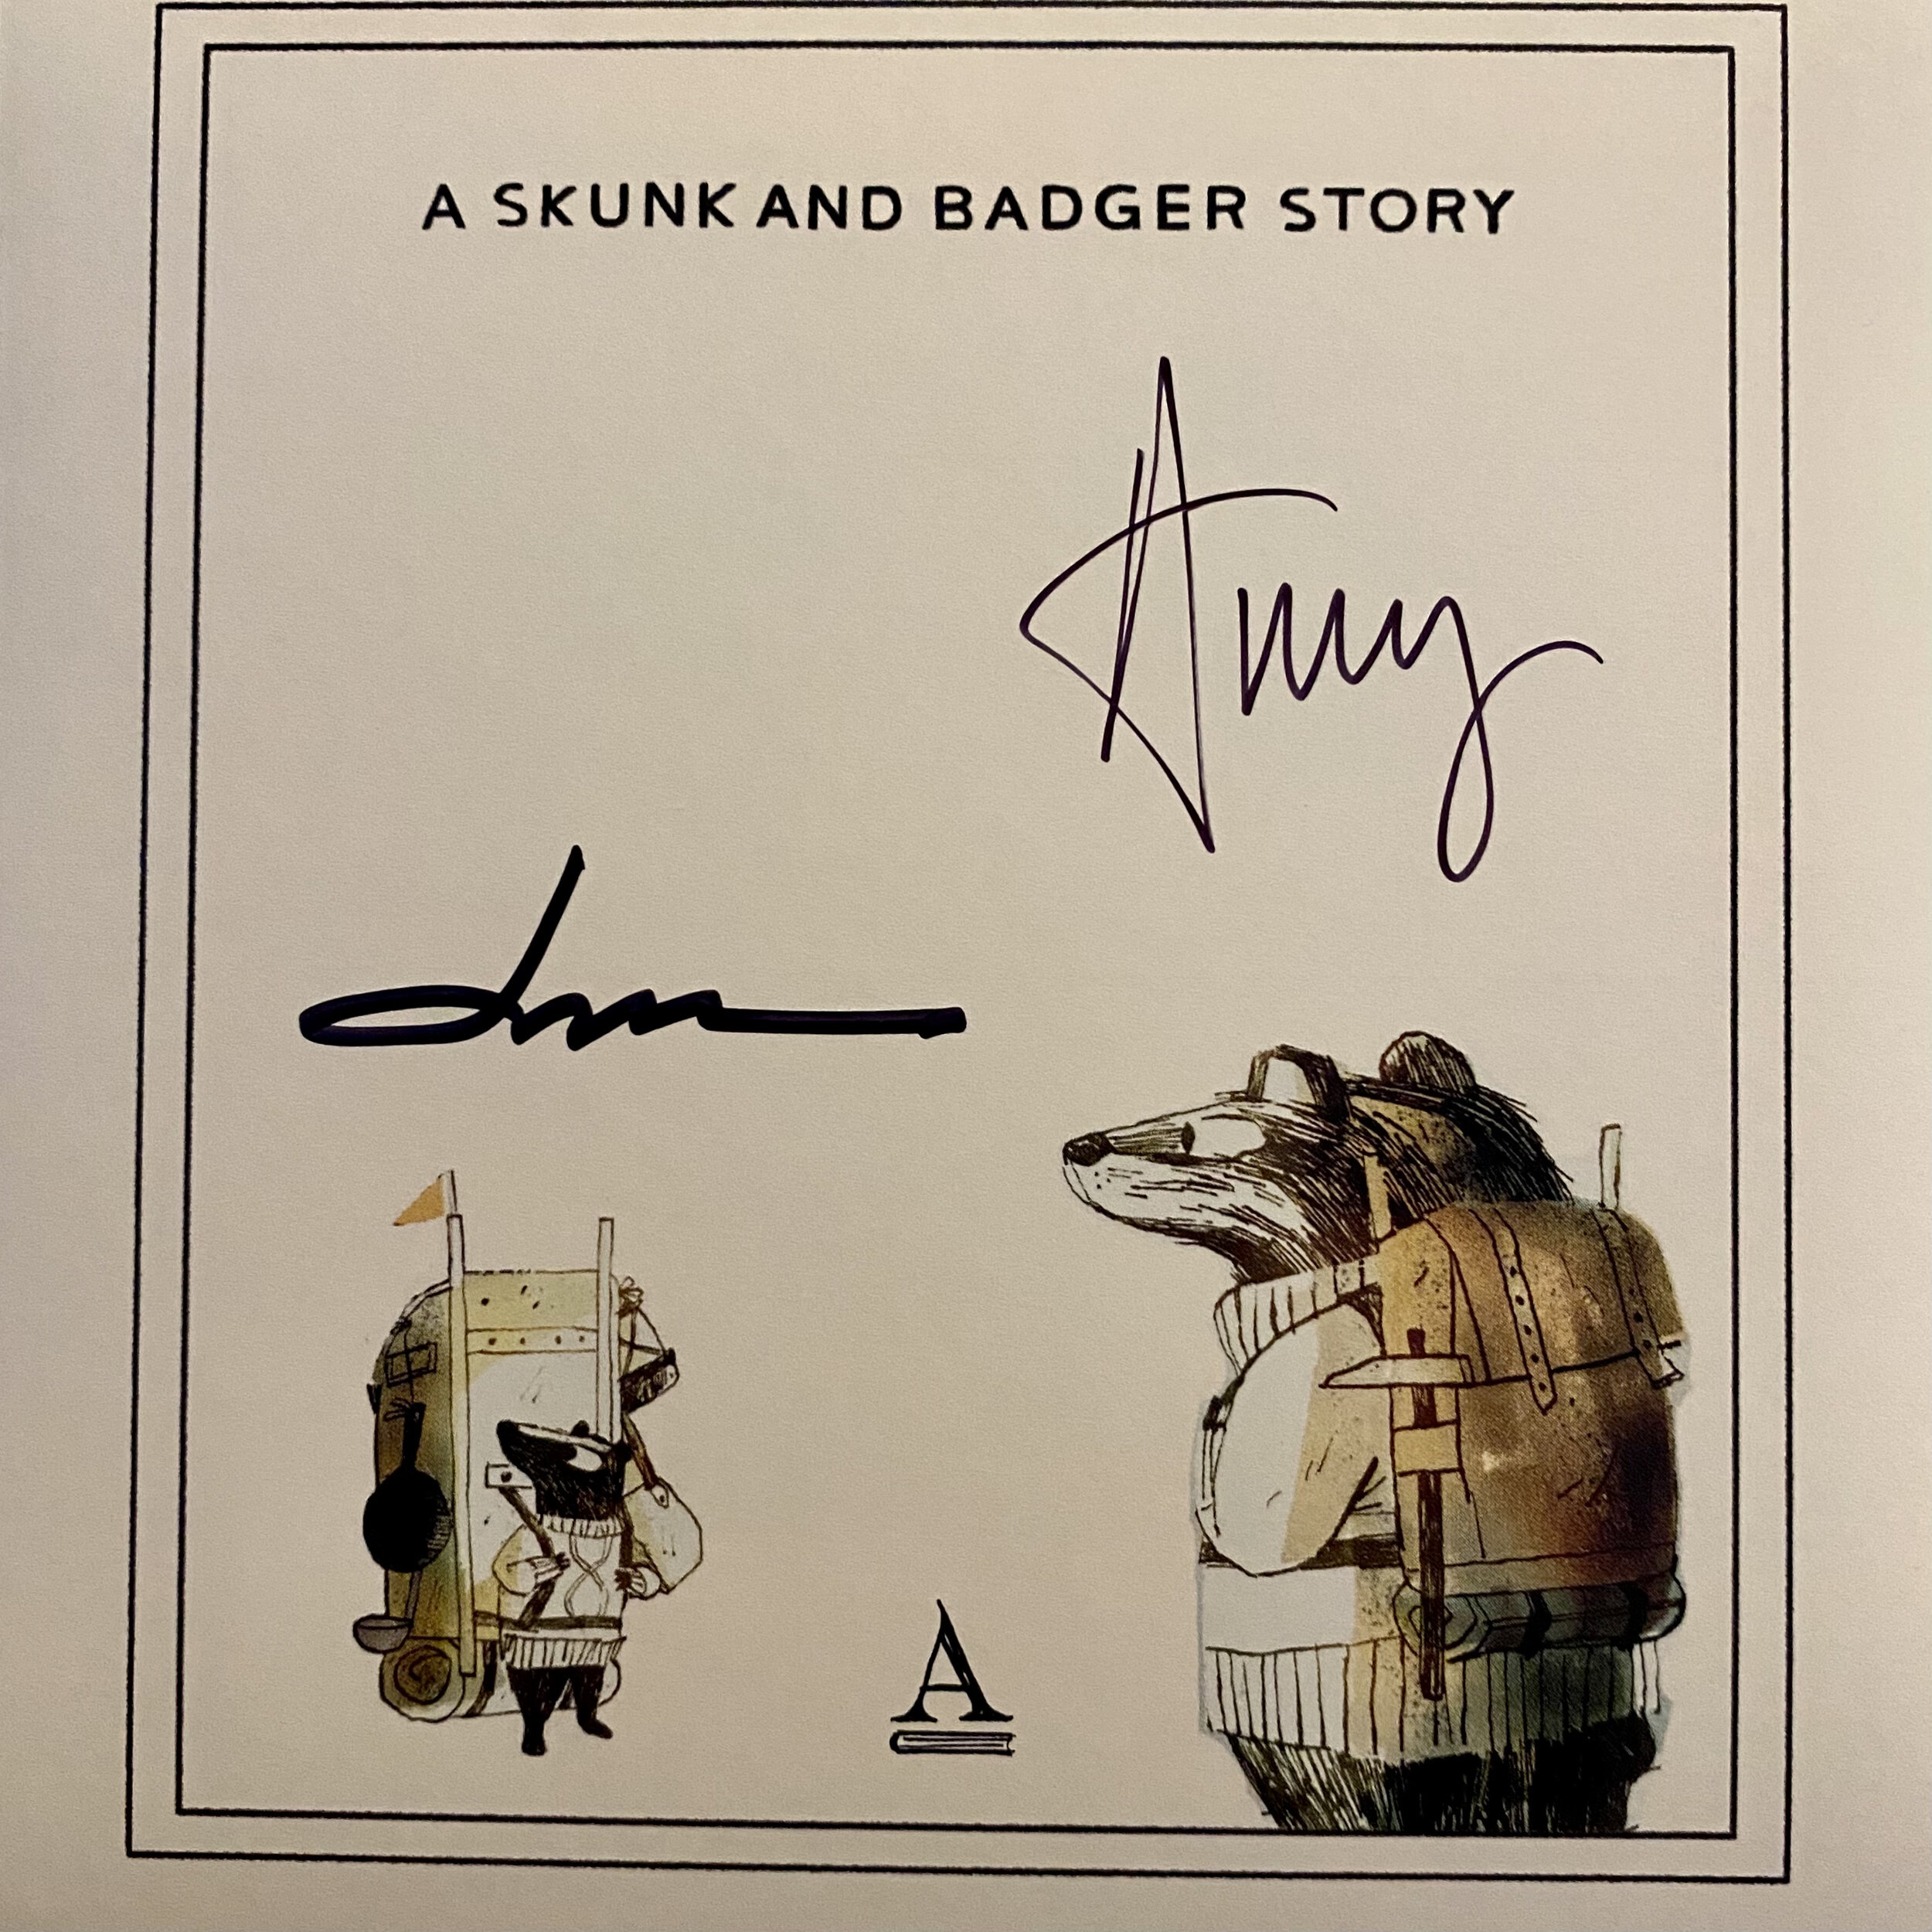 August 2021: Signing bookplates for Egg Marks the Spot